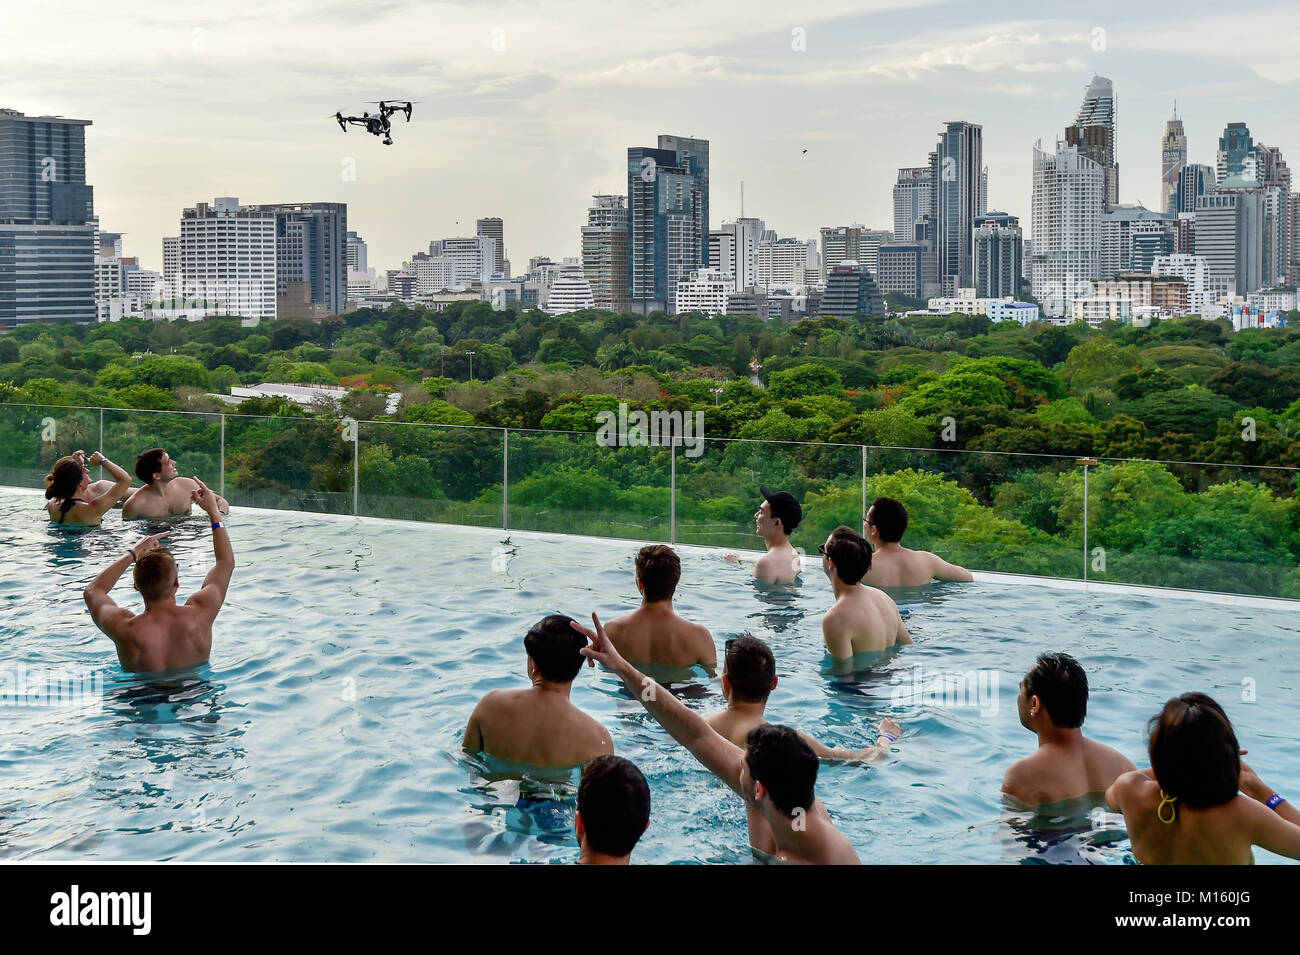 DJI Inspire 1 drone flies over Swimminpgool,in the background Skyline of Bangkok,Thailand Stock Photo